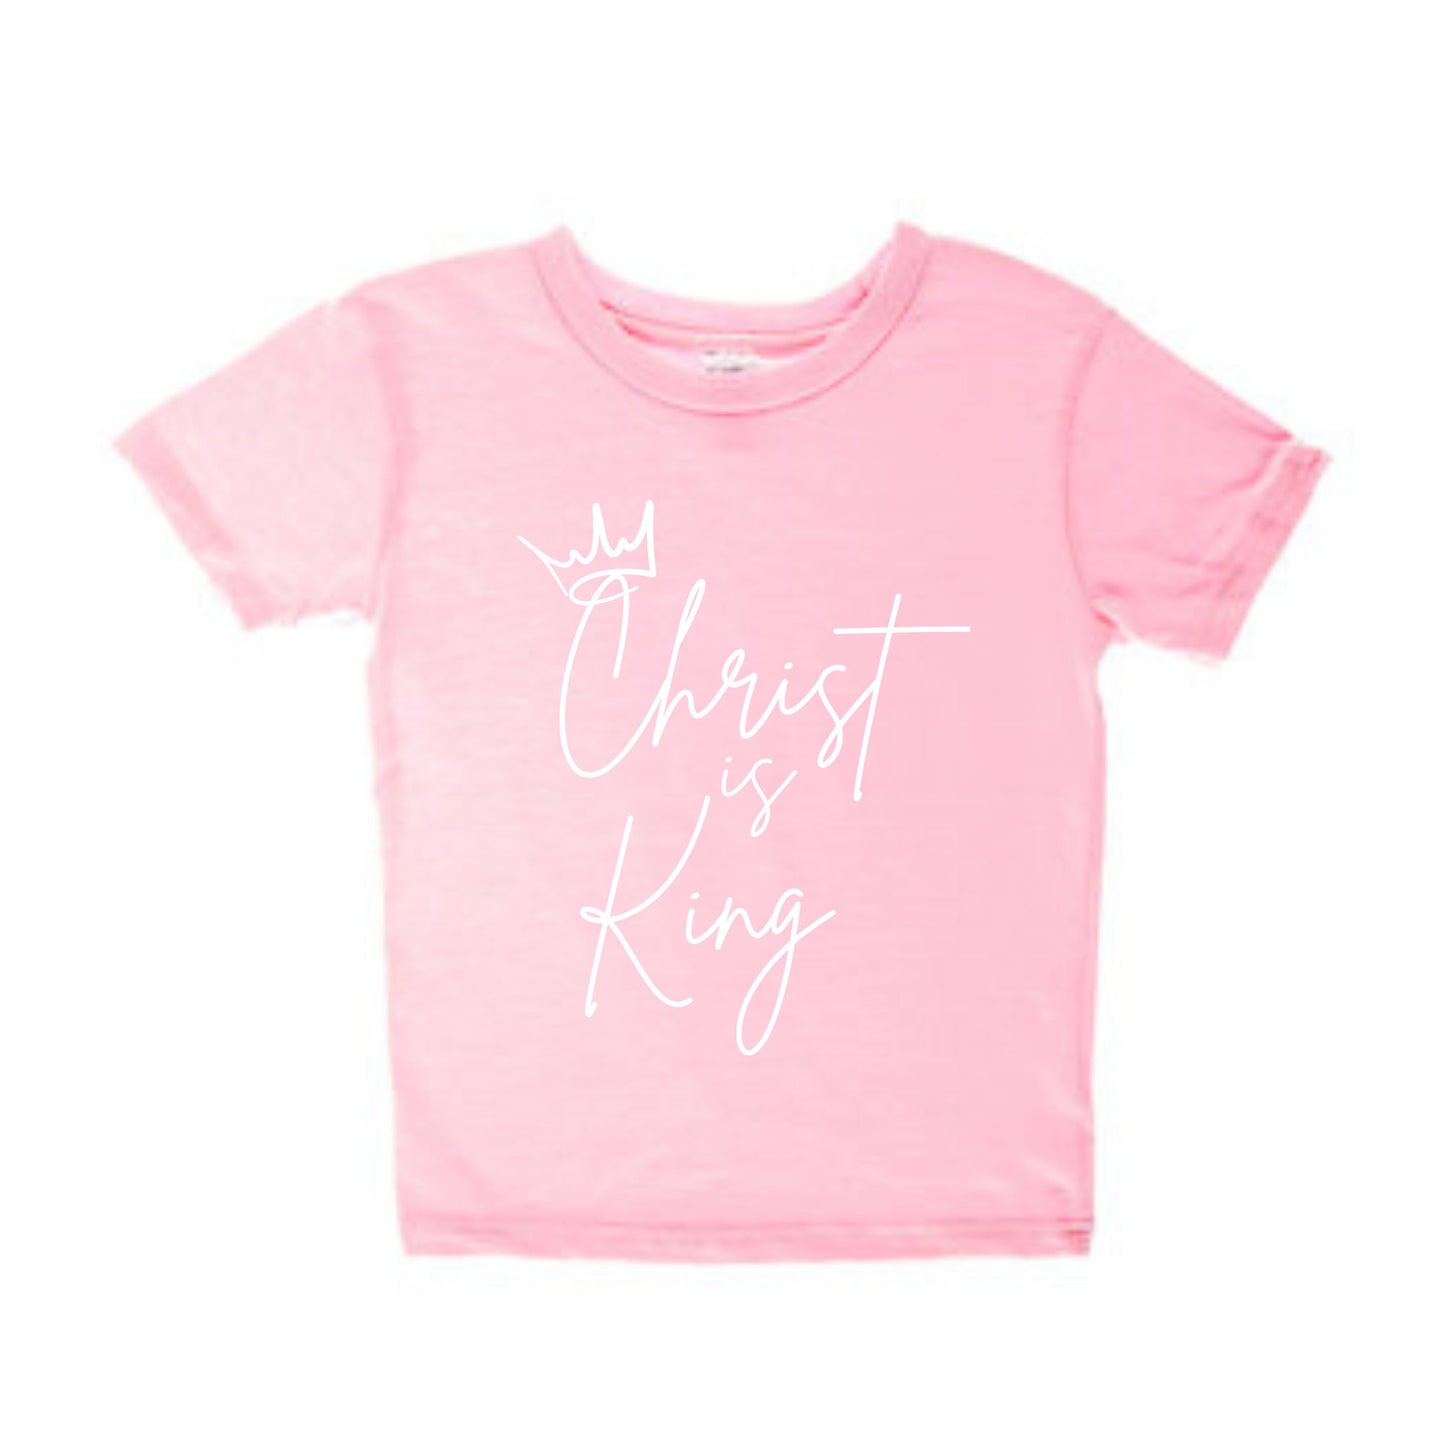 Christ is King (Youth Size)